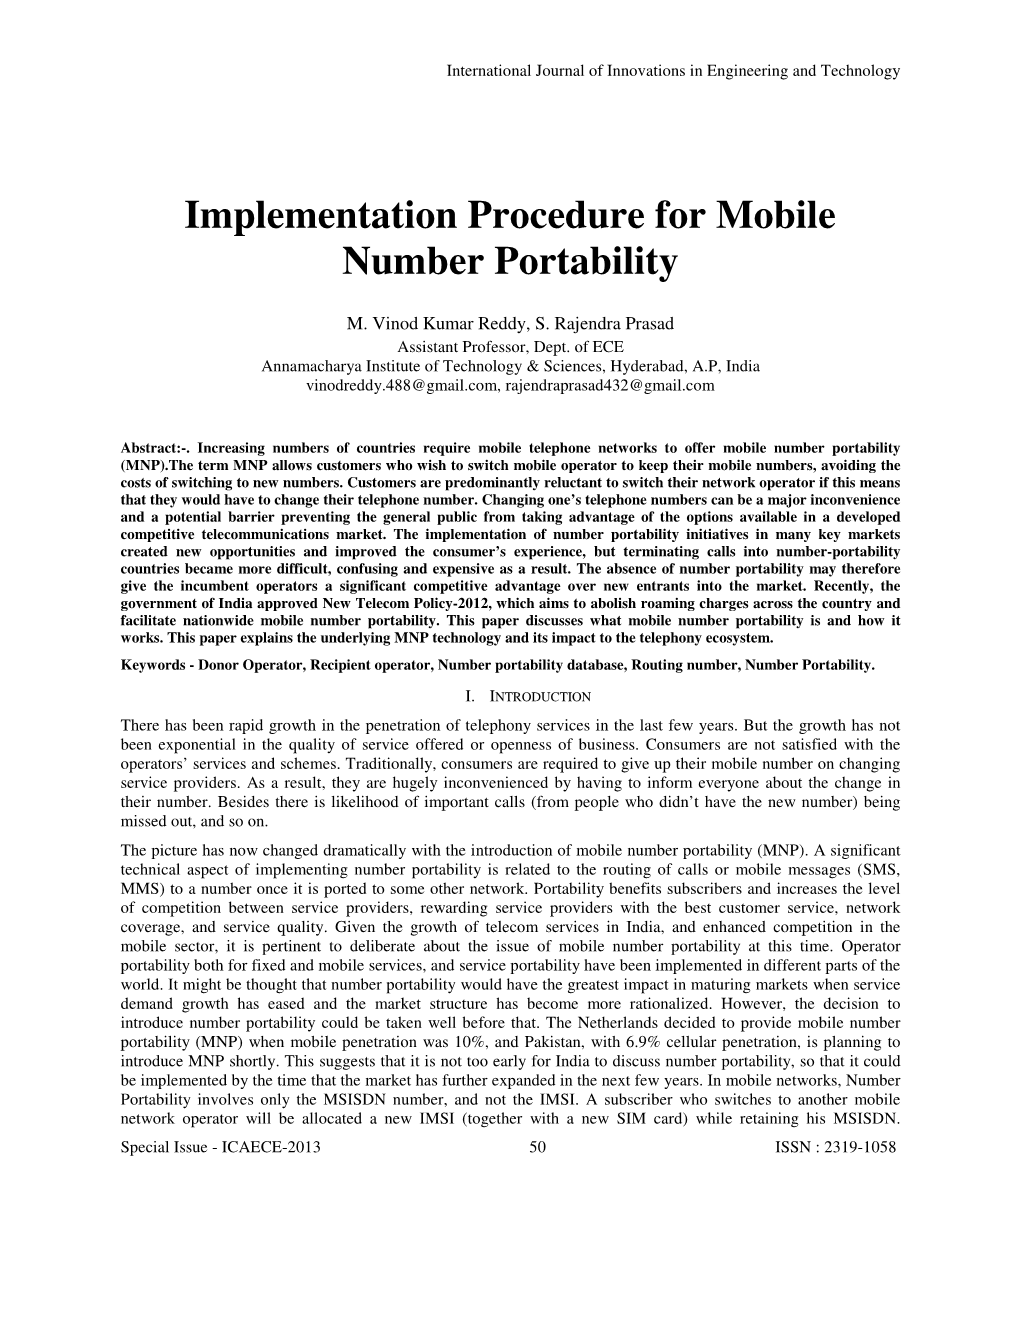 Implementation Procedure for Mobile Number Portability